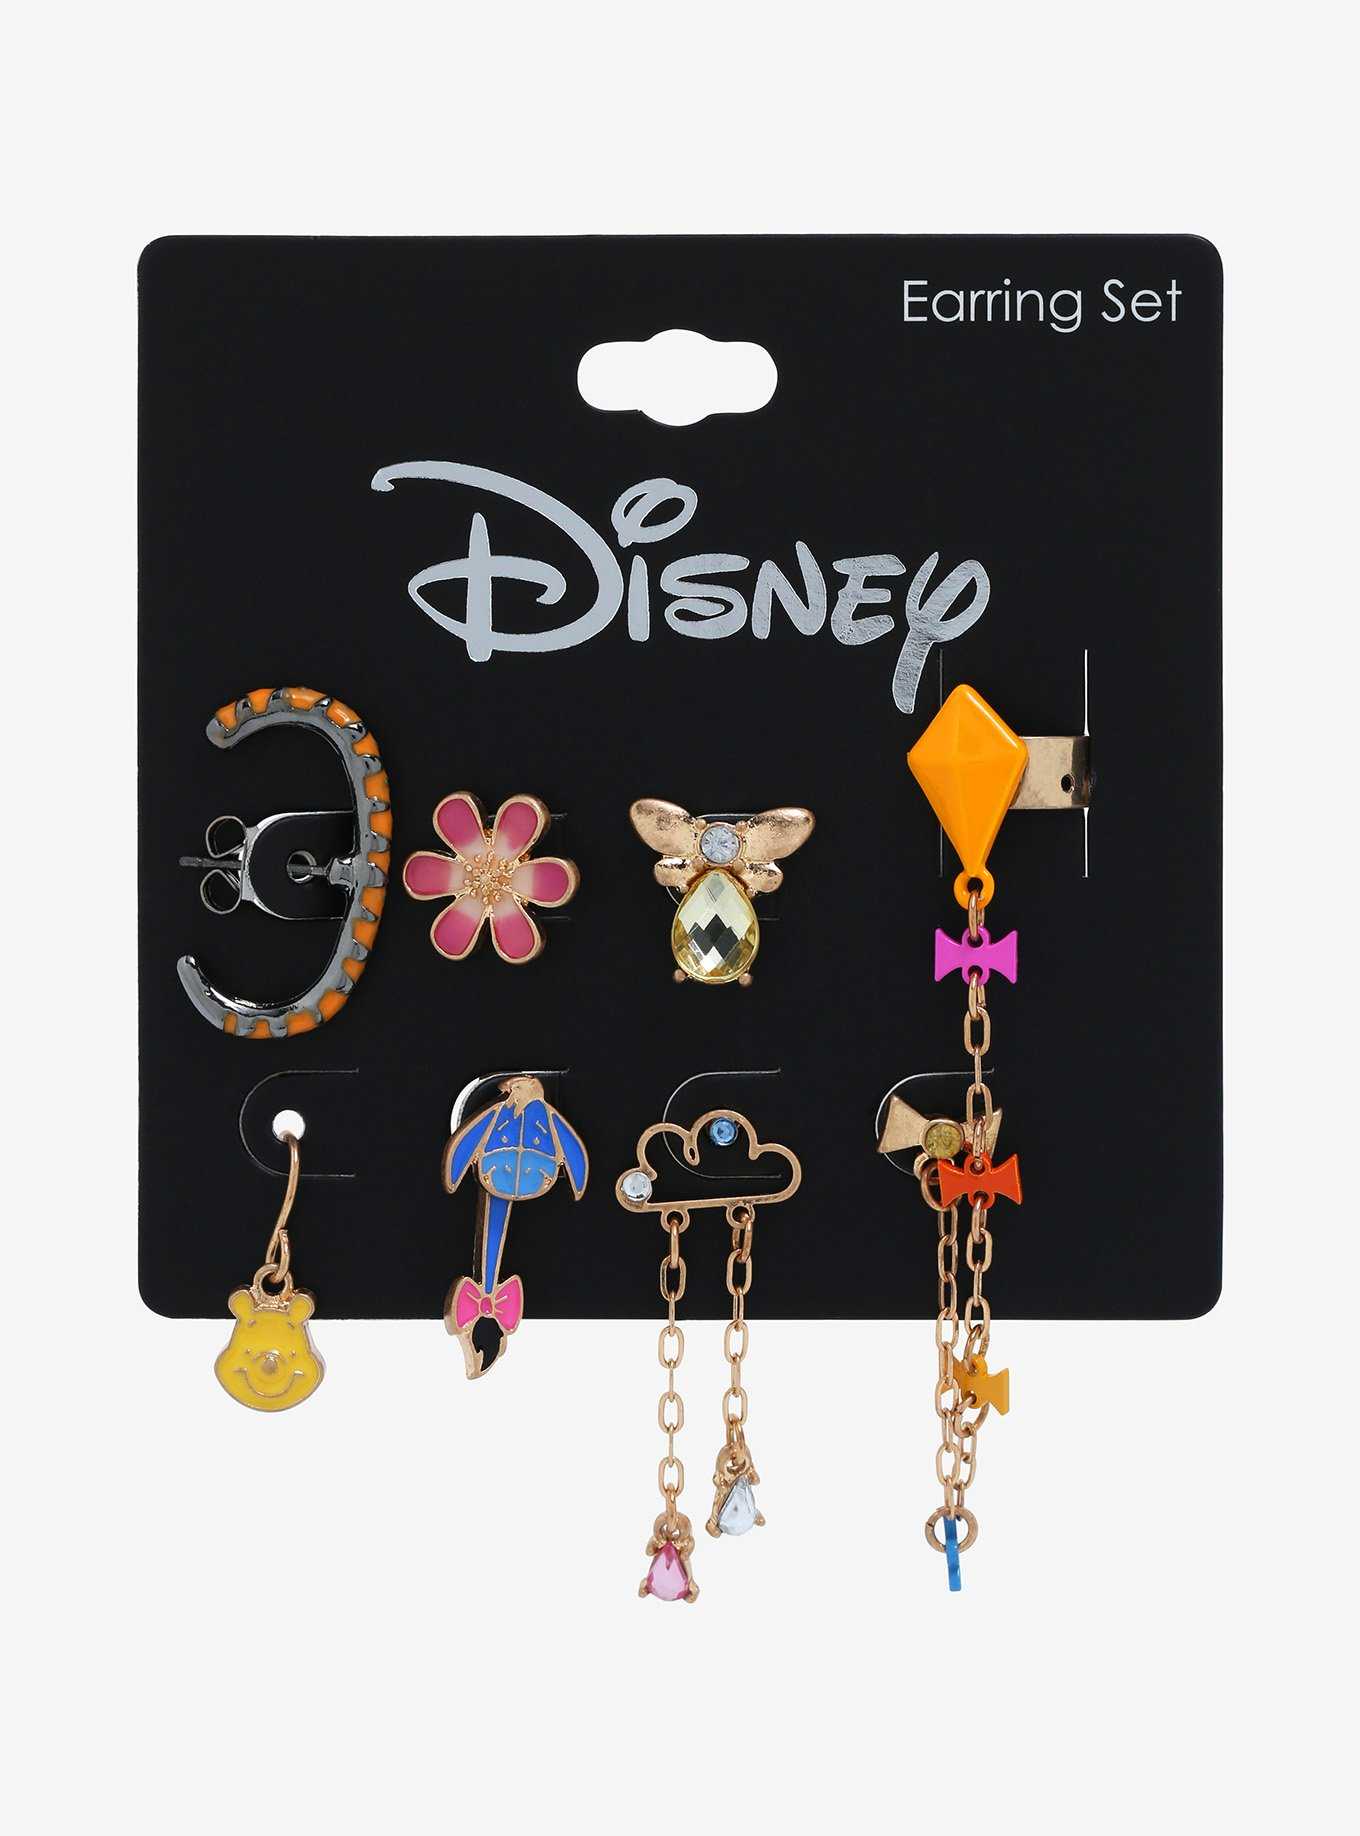 Disney Winnie the Pooh Mix & Match Earring Set - BoxLunch Exclusive, , hi-res